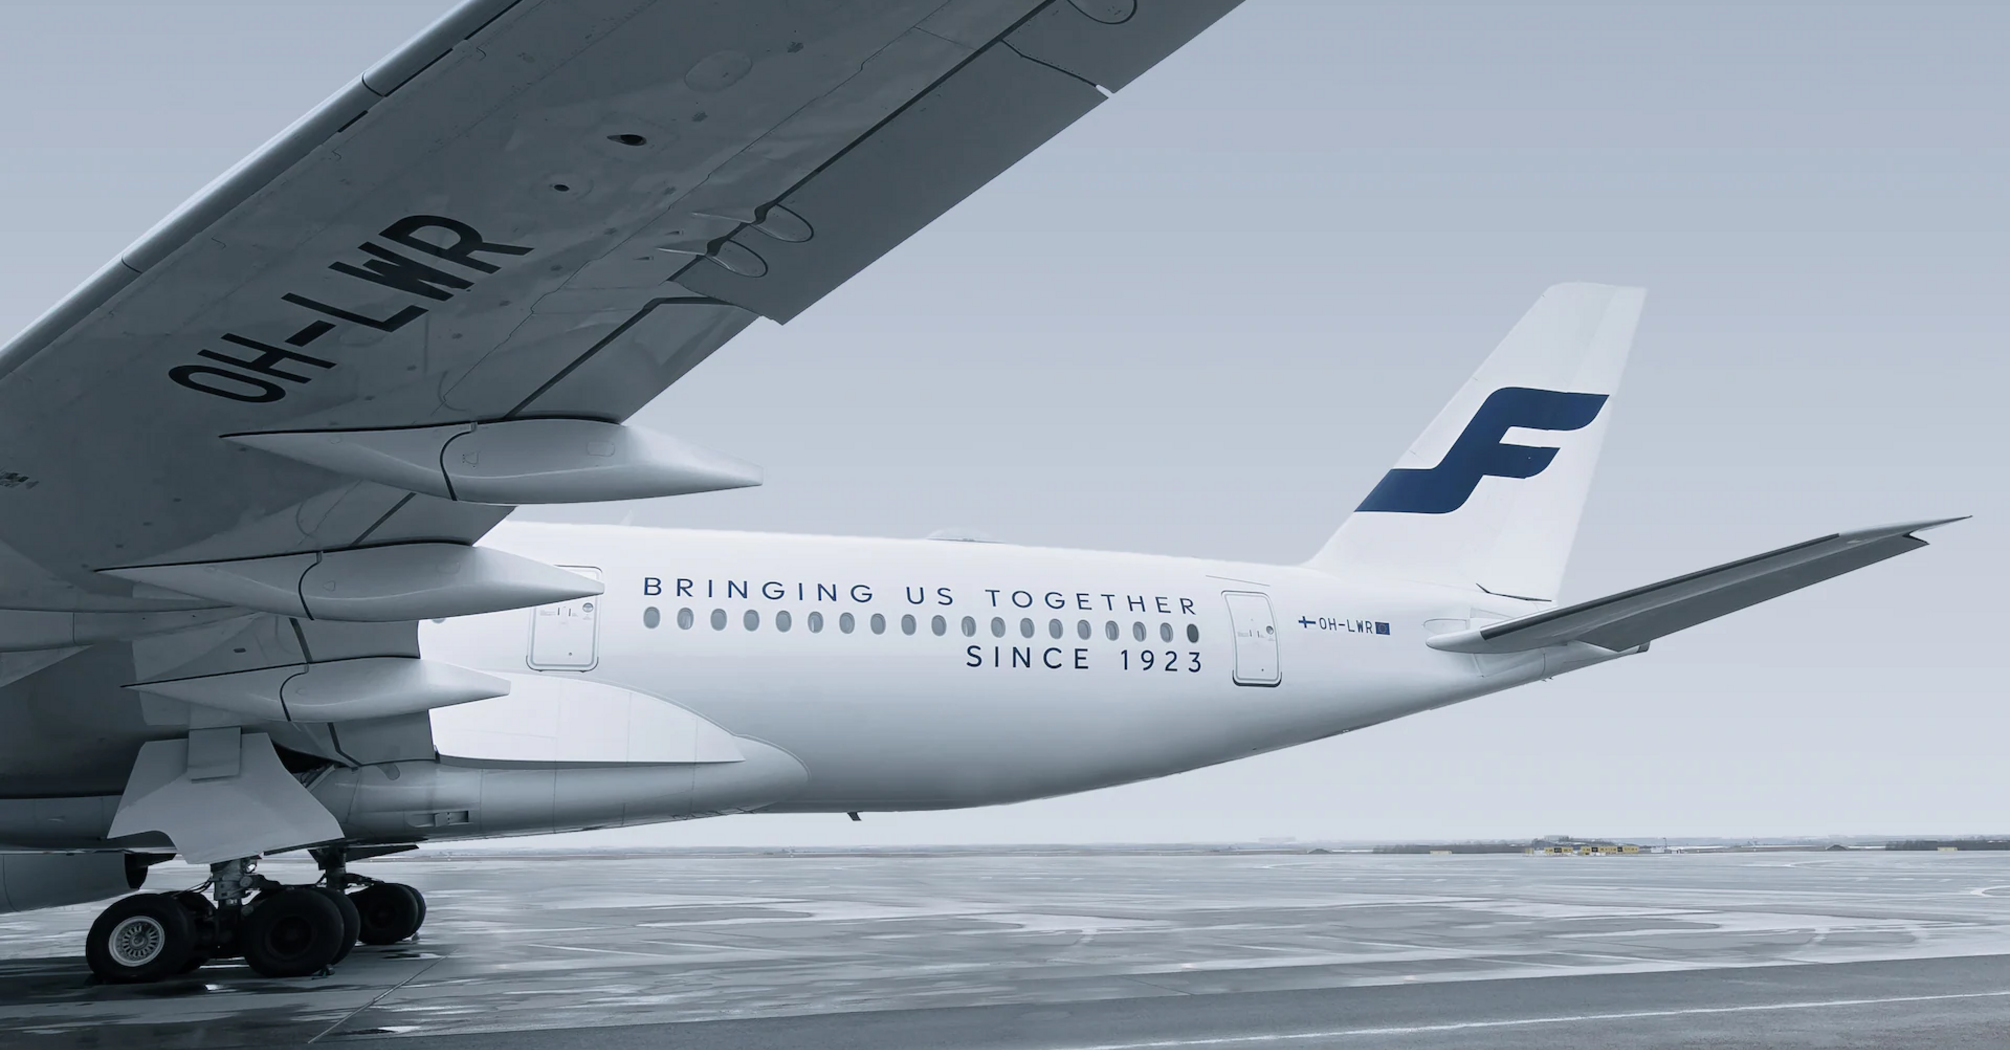 For safety reasons, Finnair plans to weigh not only luggage but also passengers on its flights